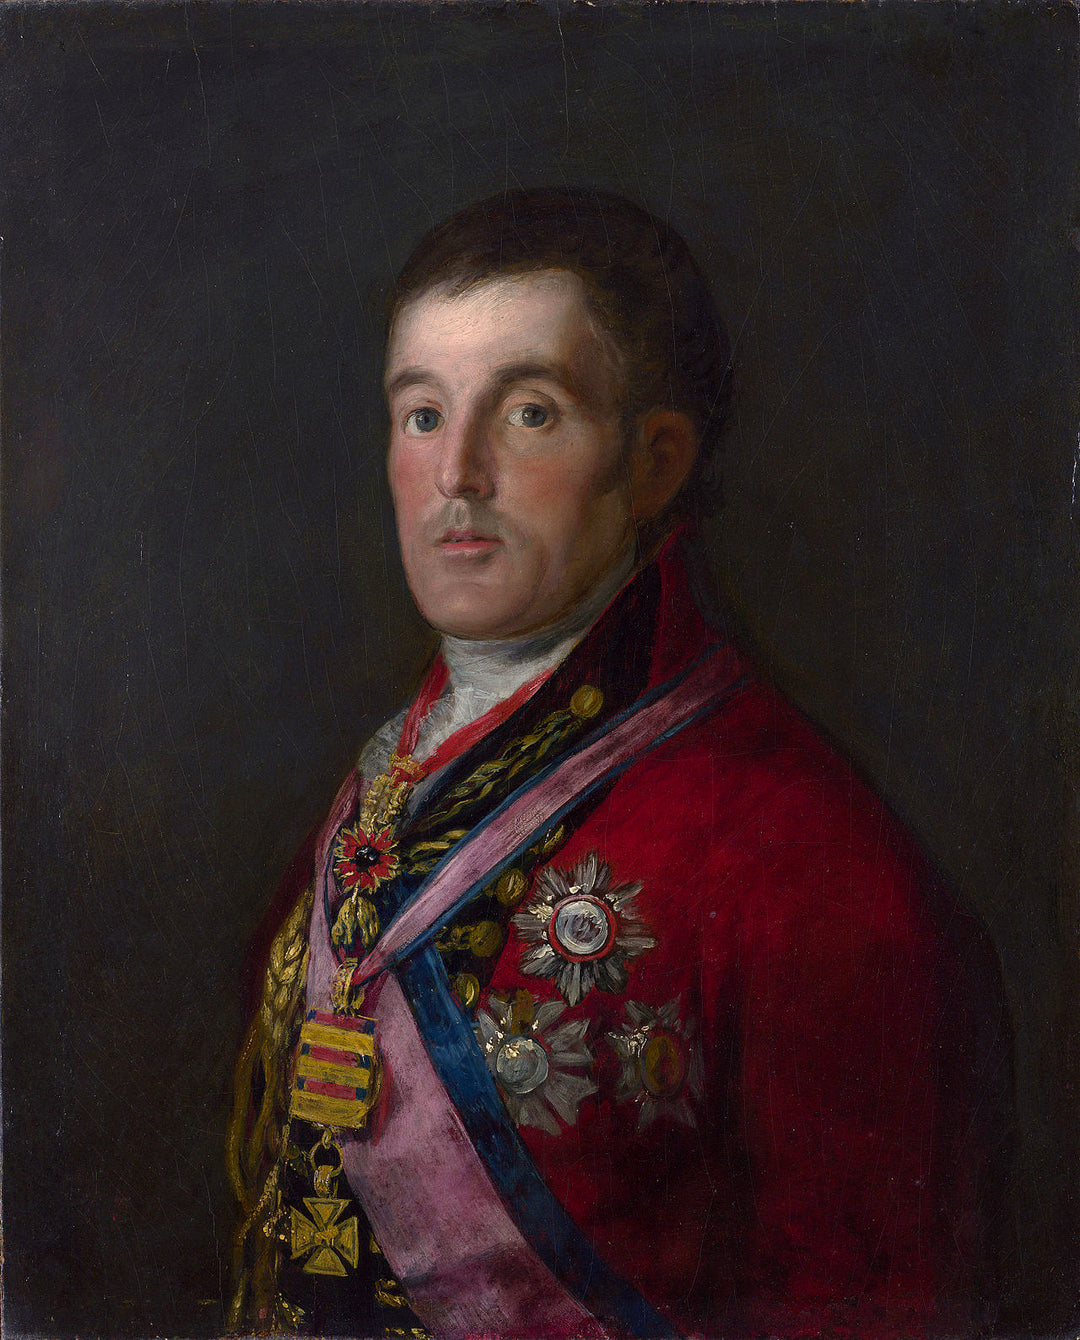 Portrait of the Duke of Wellington by Francisco Goya, Reproduction Painting for Sale. Blue Surf Art